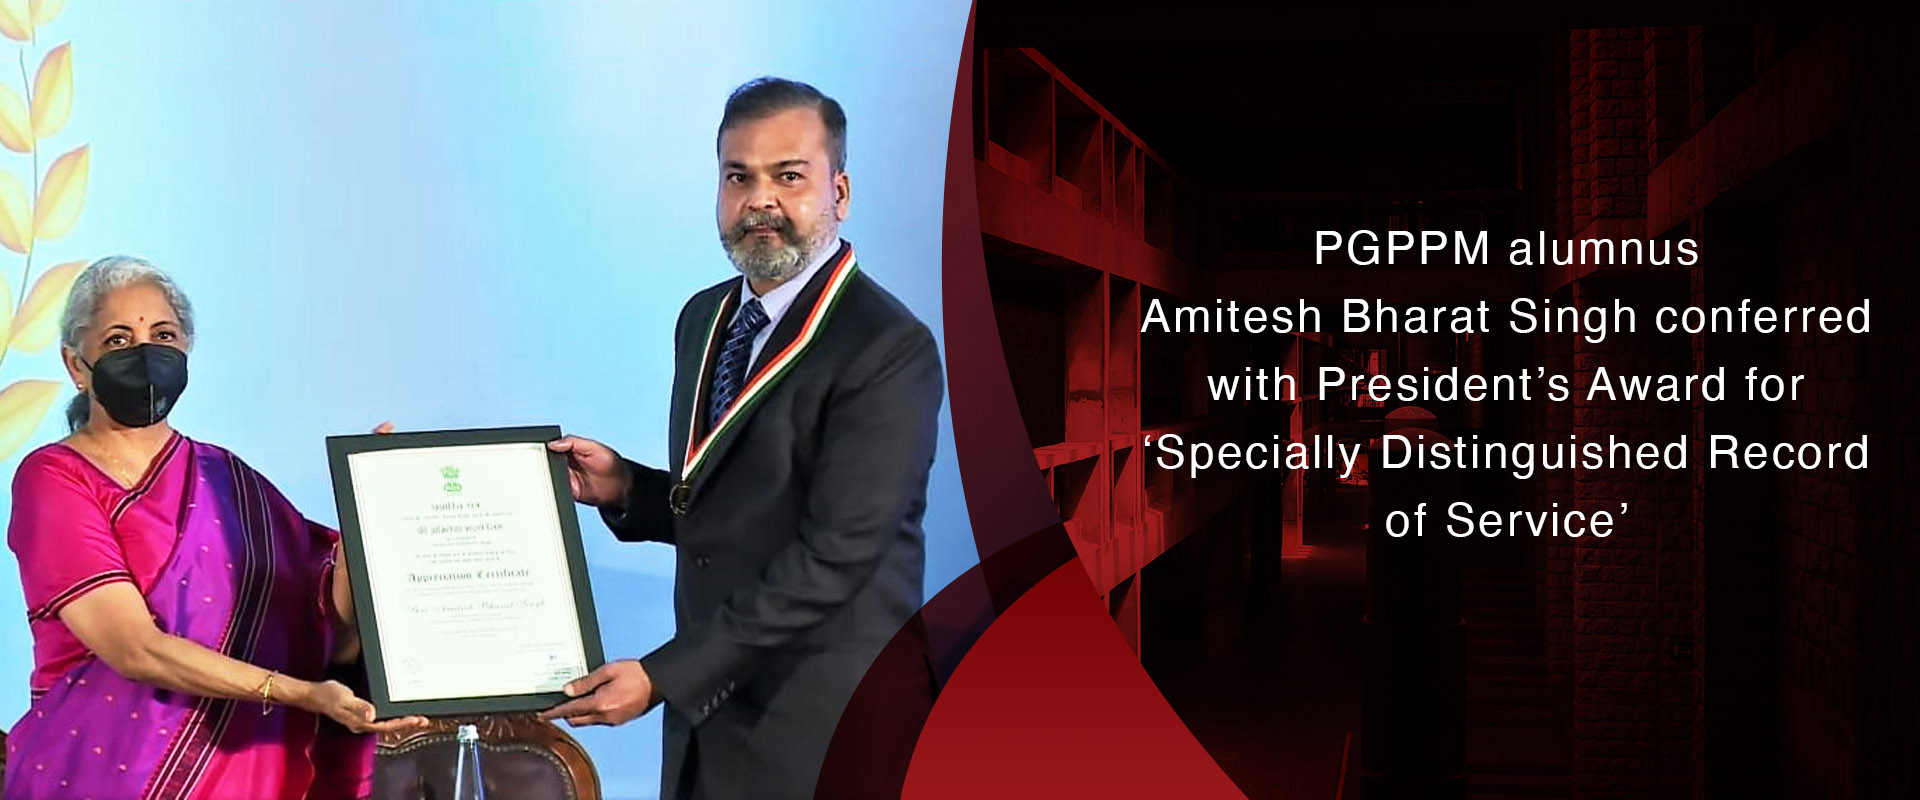 PGPPM alumnus Amitesh Bharat Singh conferred with President’s Award for ‘Specially Distinguished Record of Service’